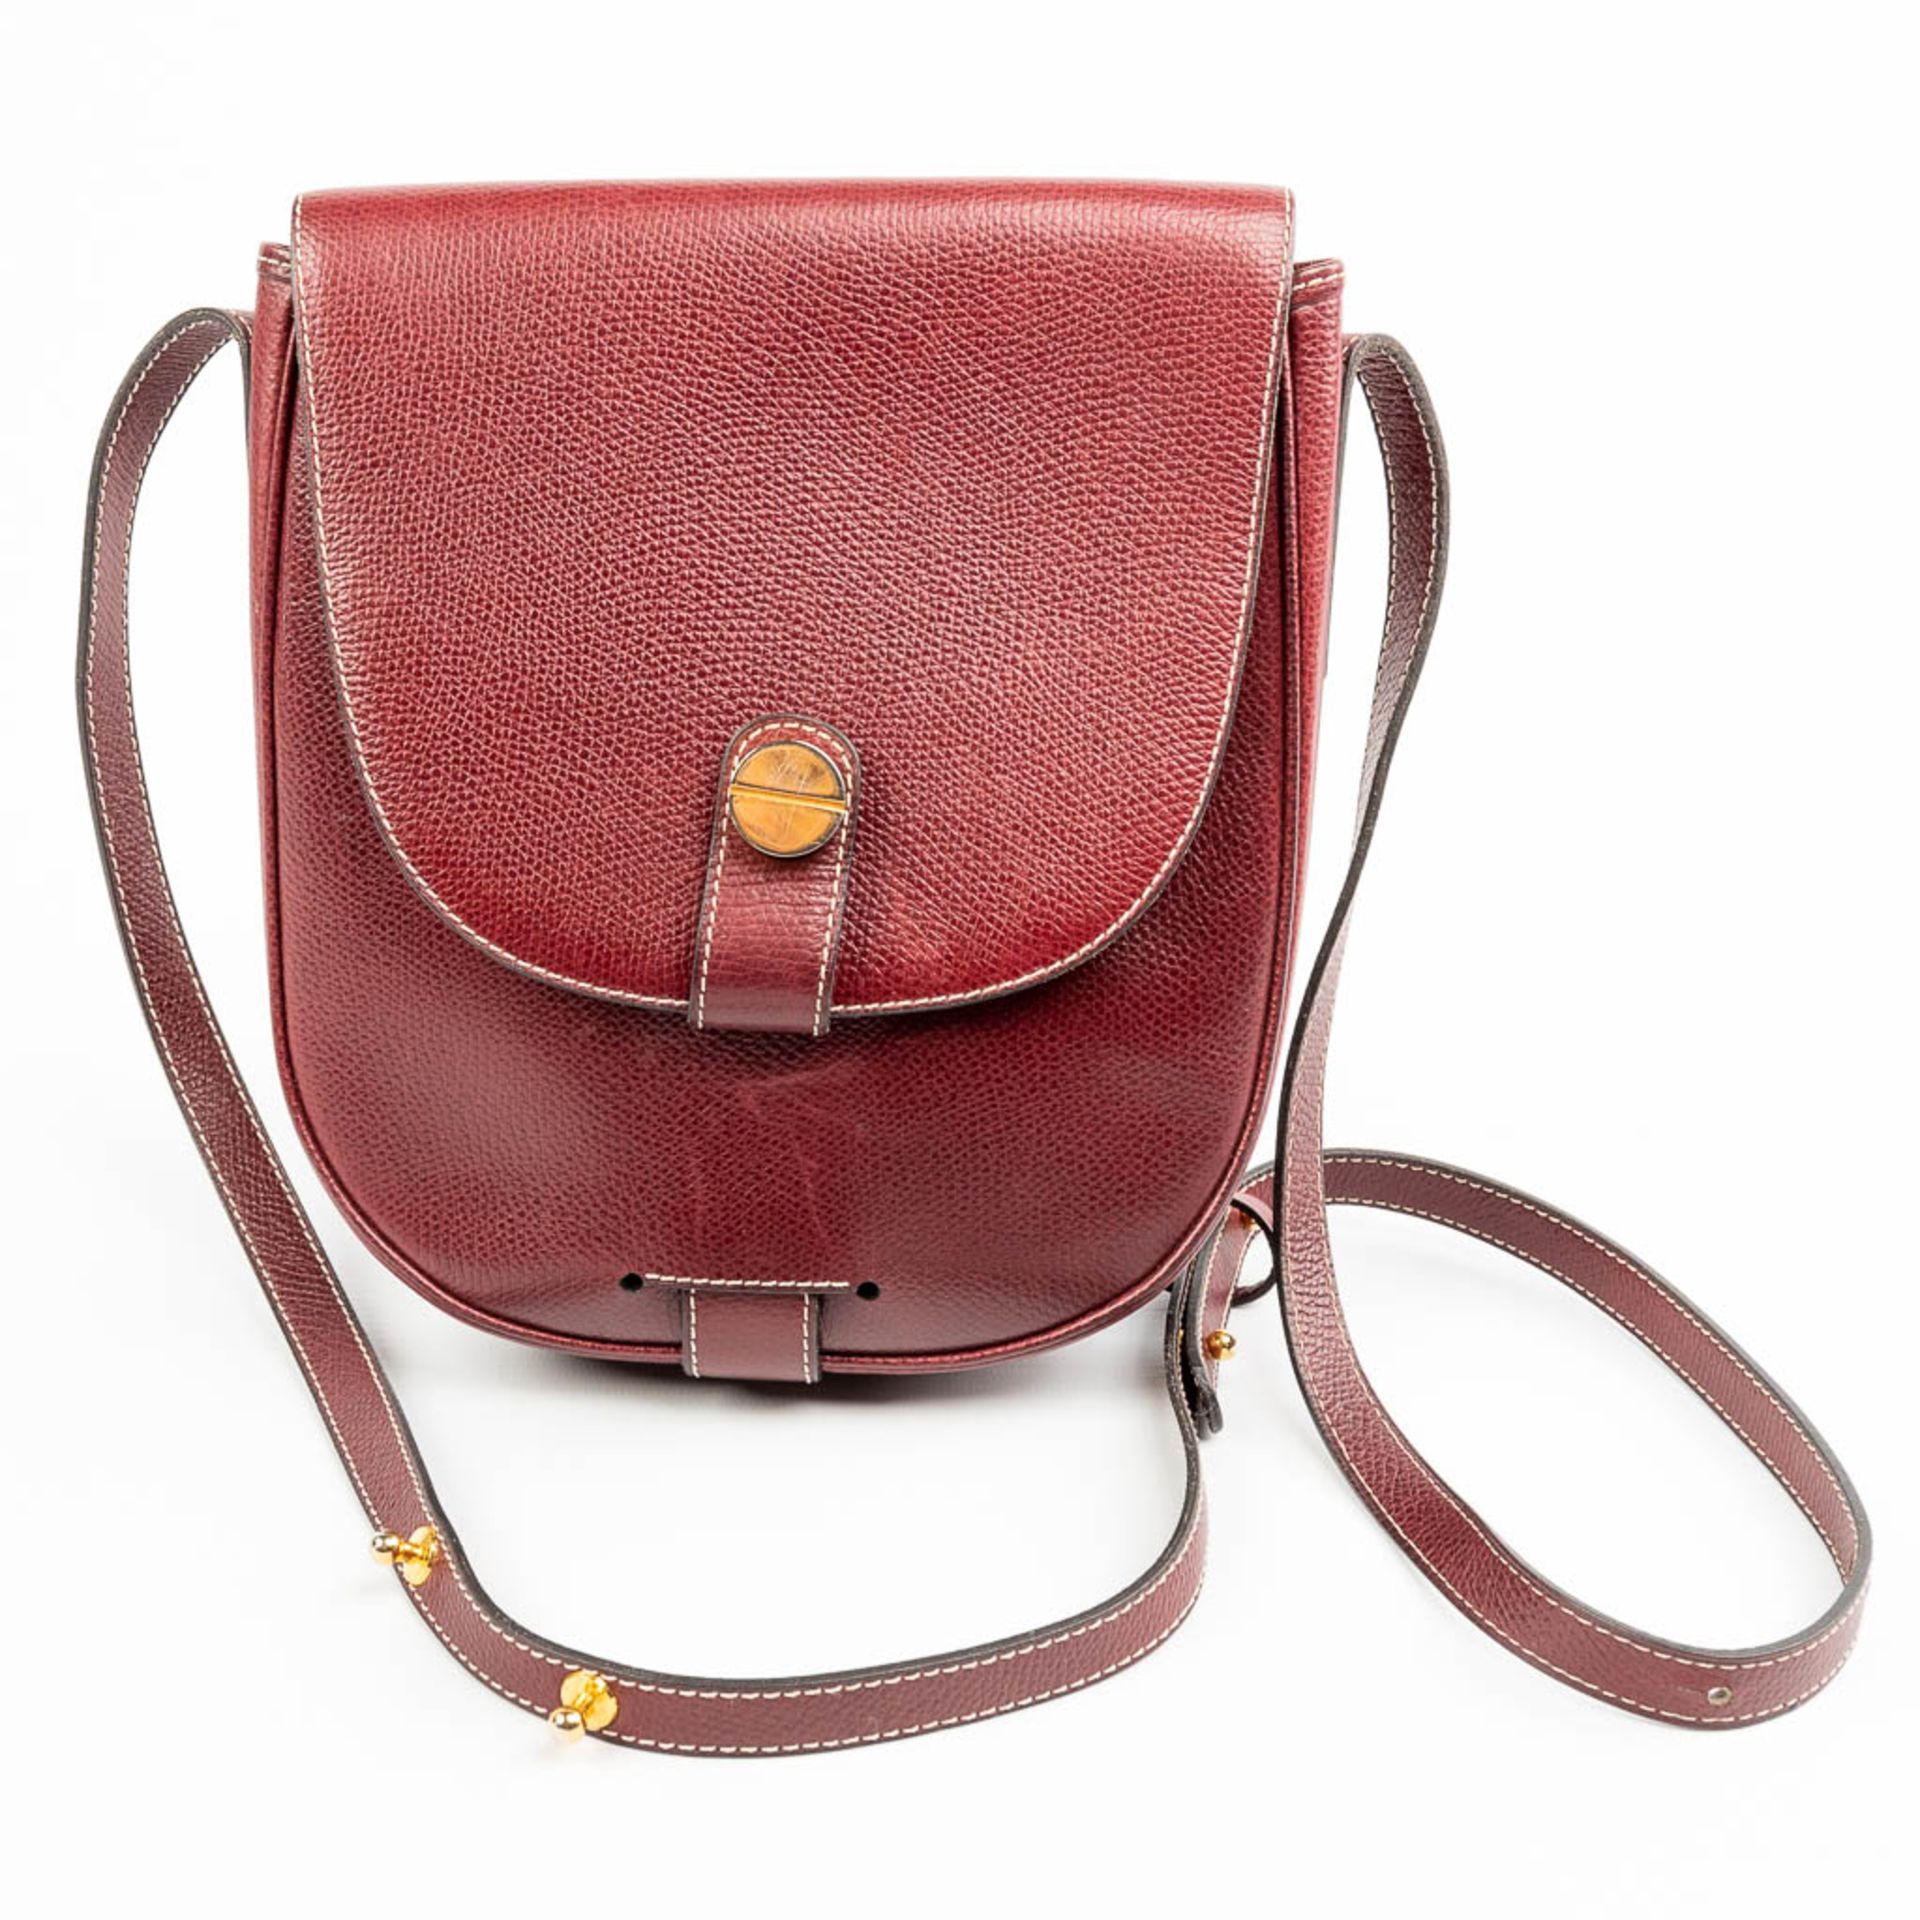 A purse made of red leather and marked Delvaux. - Image 10 of 10